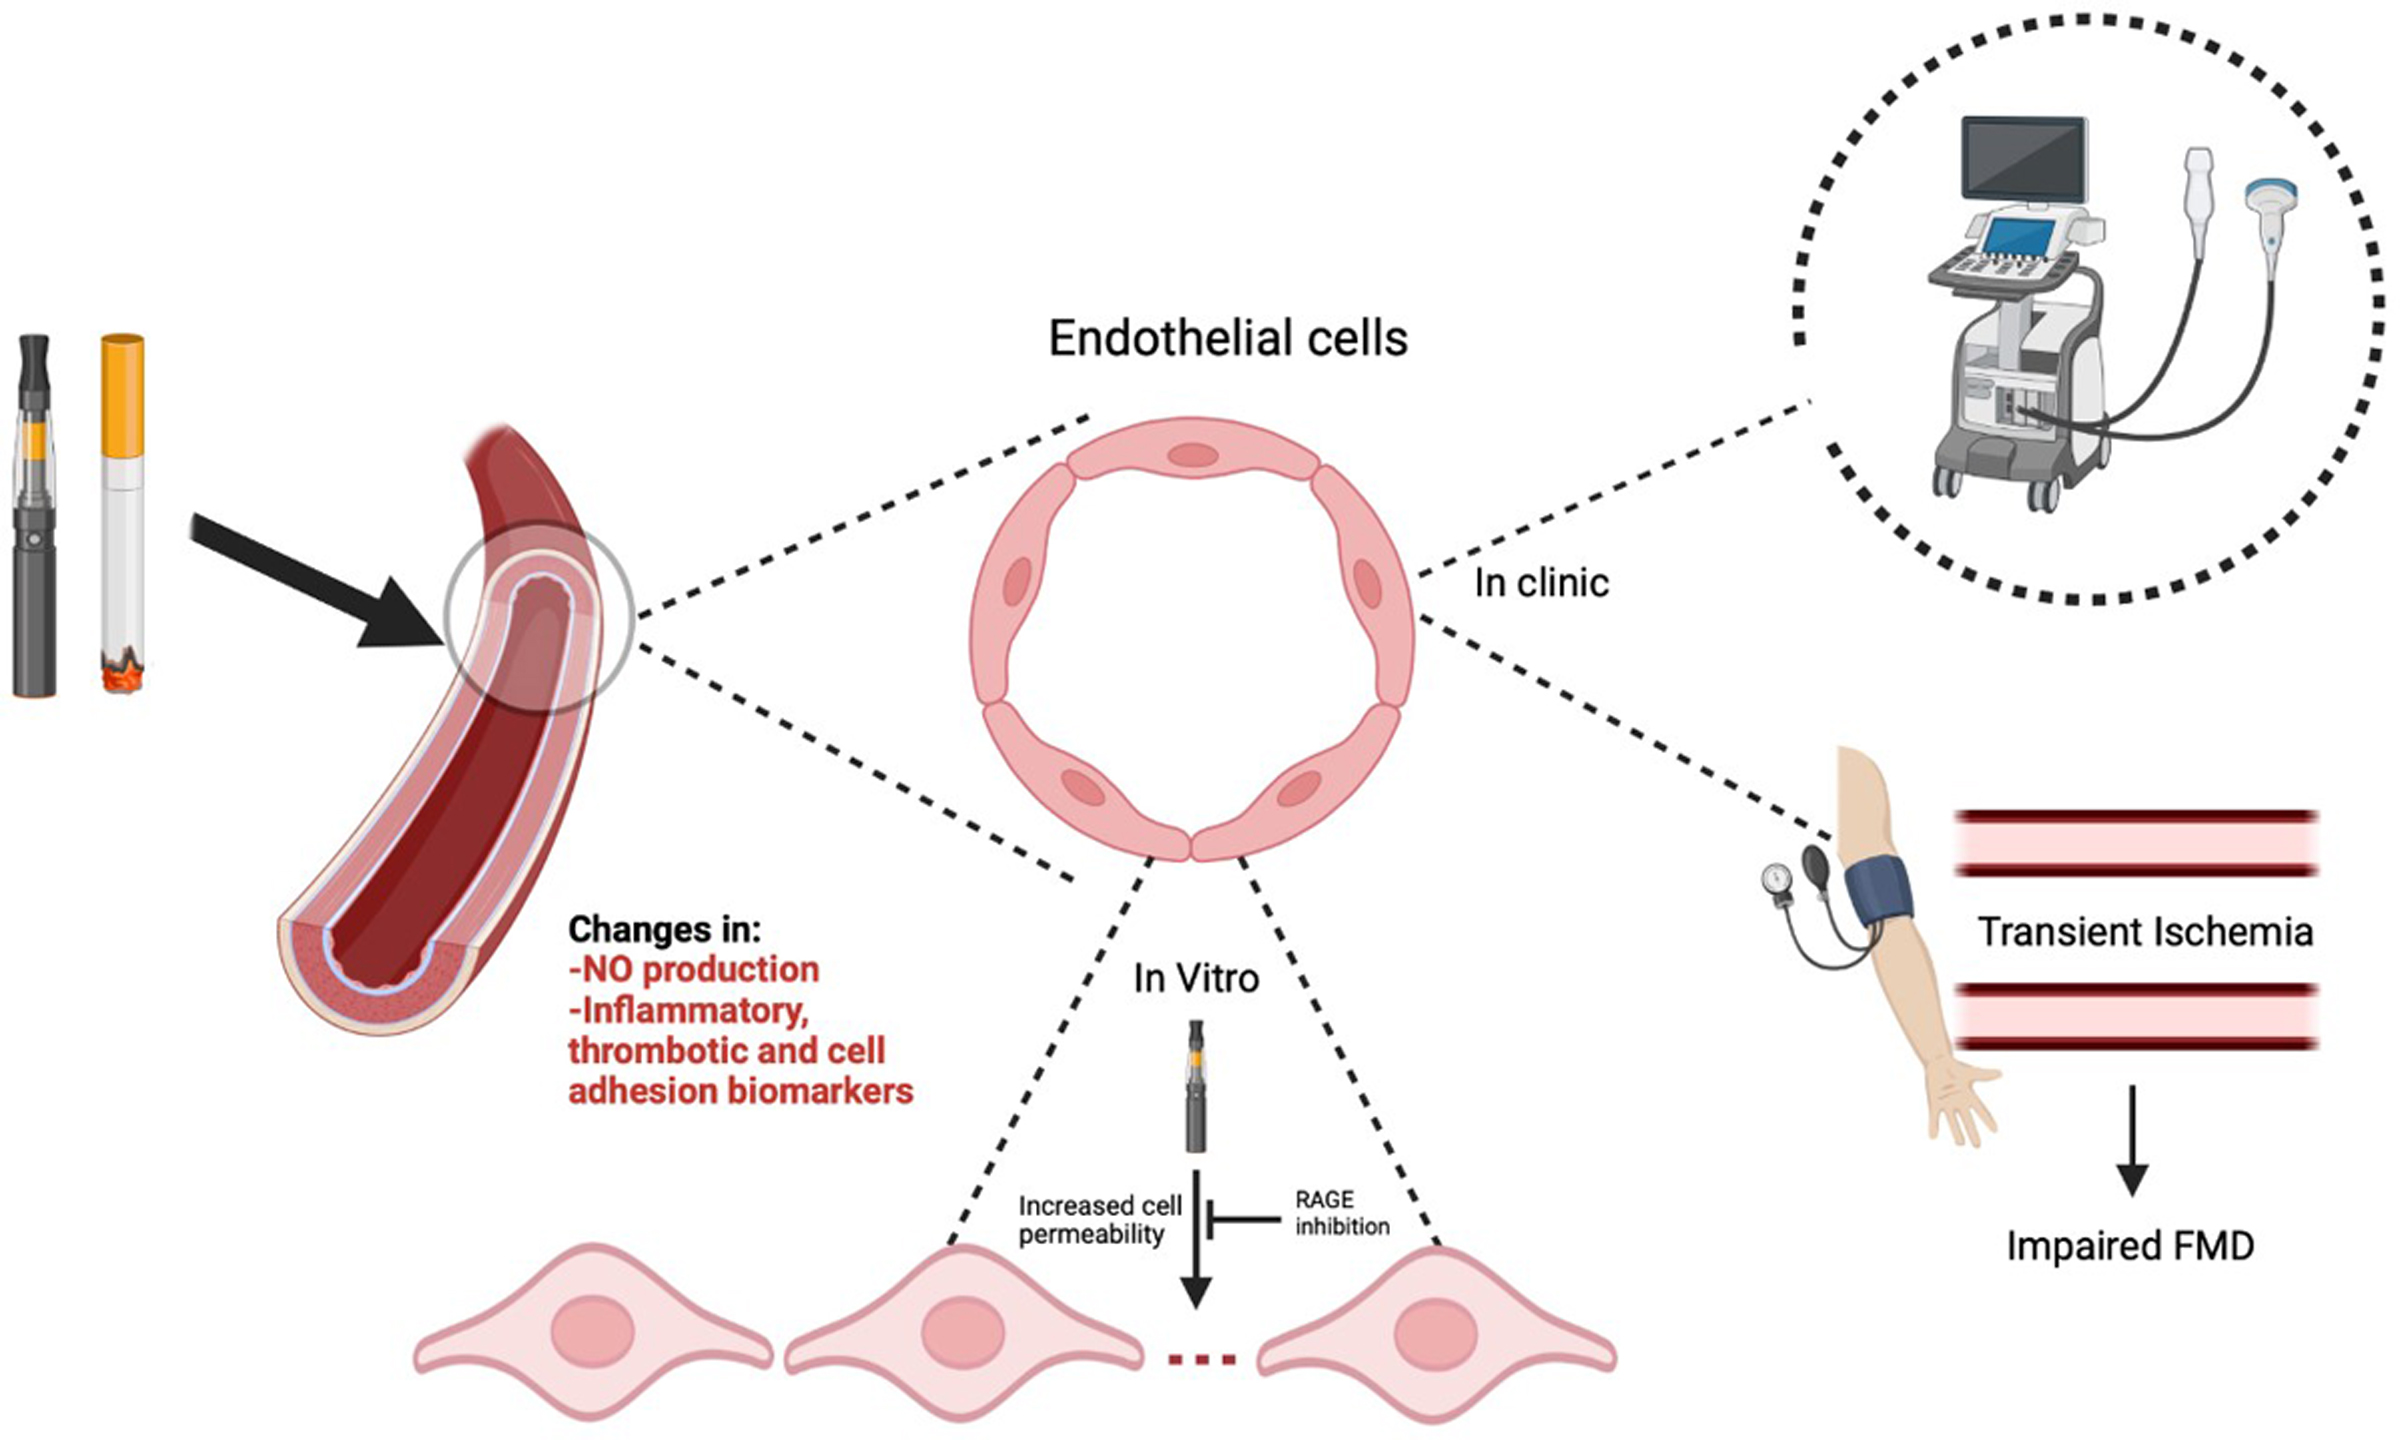 Chronic E-Cigarette Use Impairs Endothelial Function on the Physiological and Cellular Levels